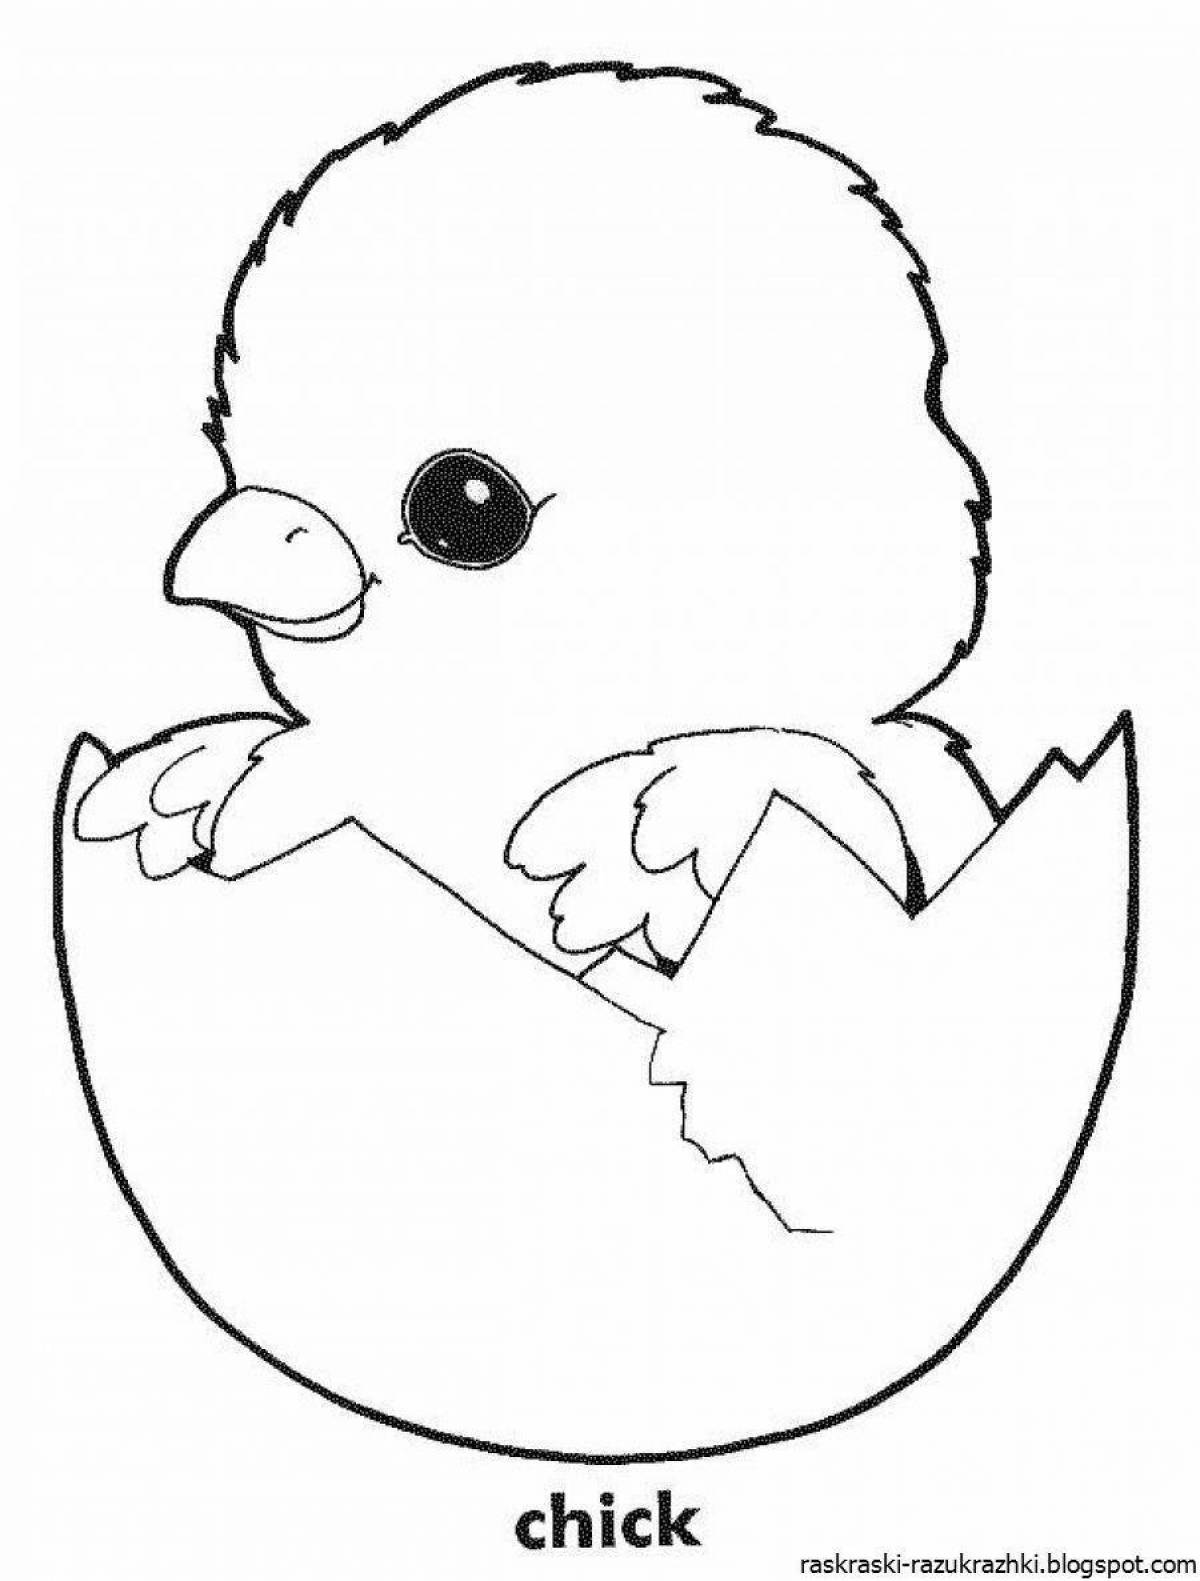 Playful chick drawing for kids